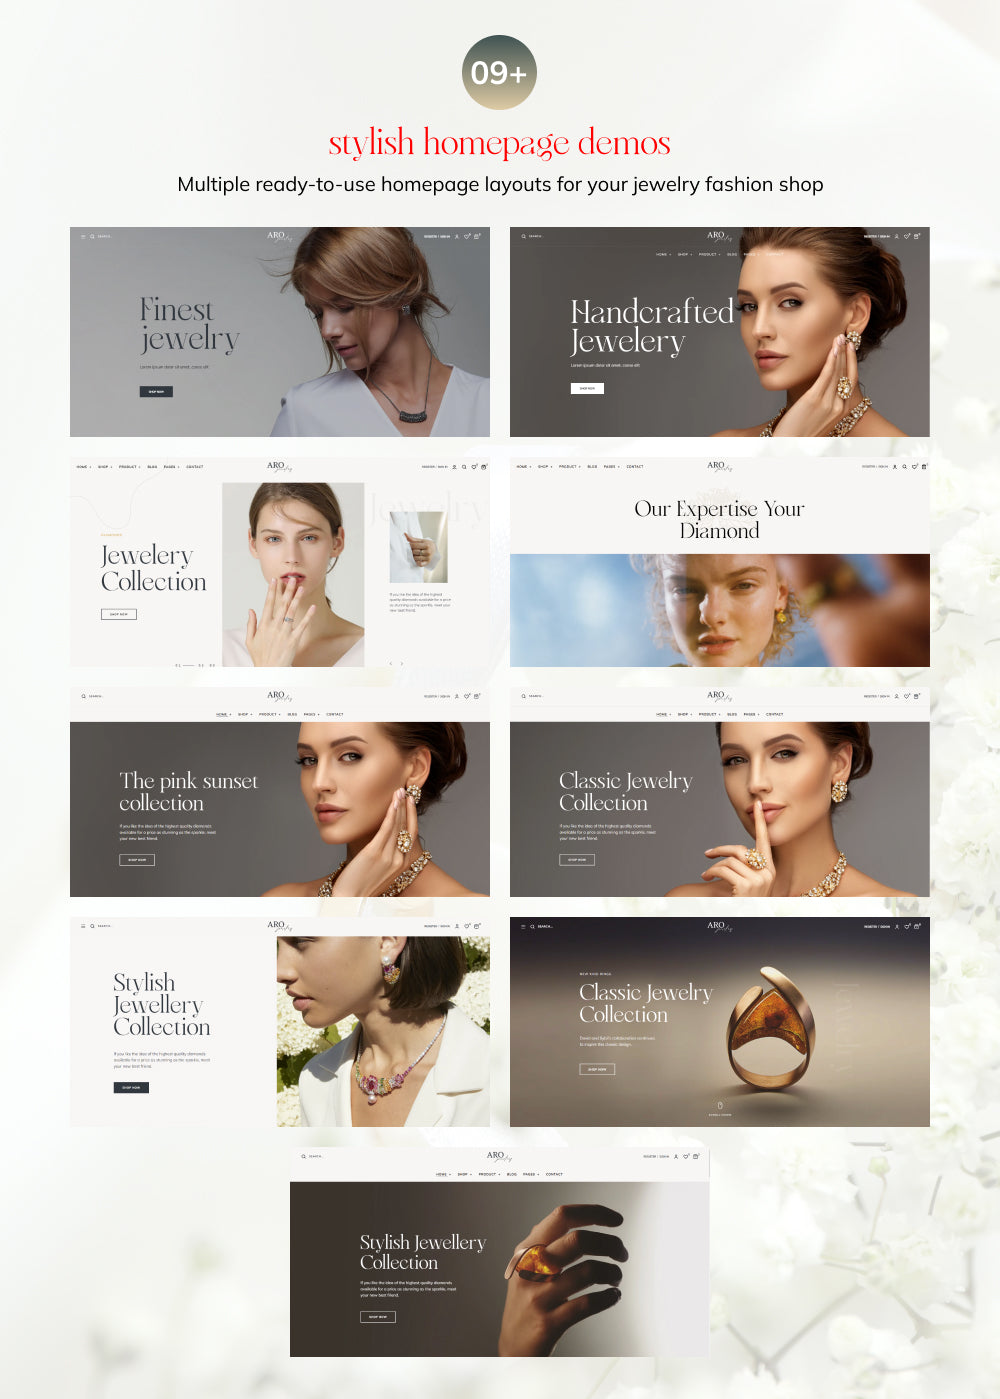  09+ stunning homepage demos for jewelry fashion store